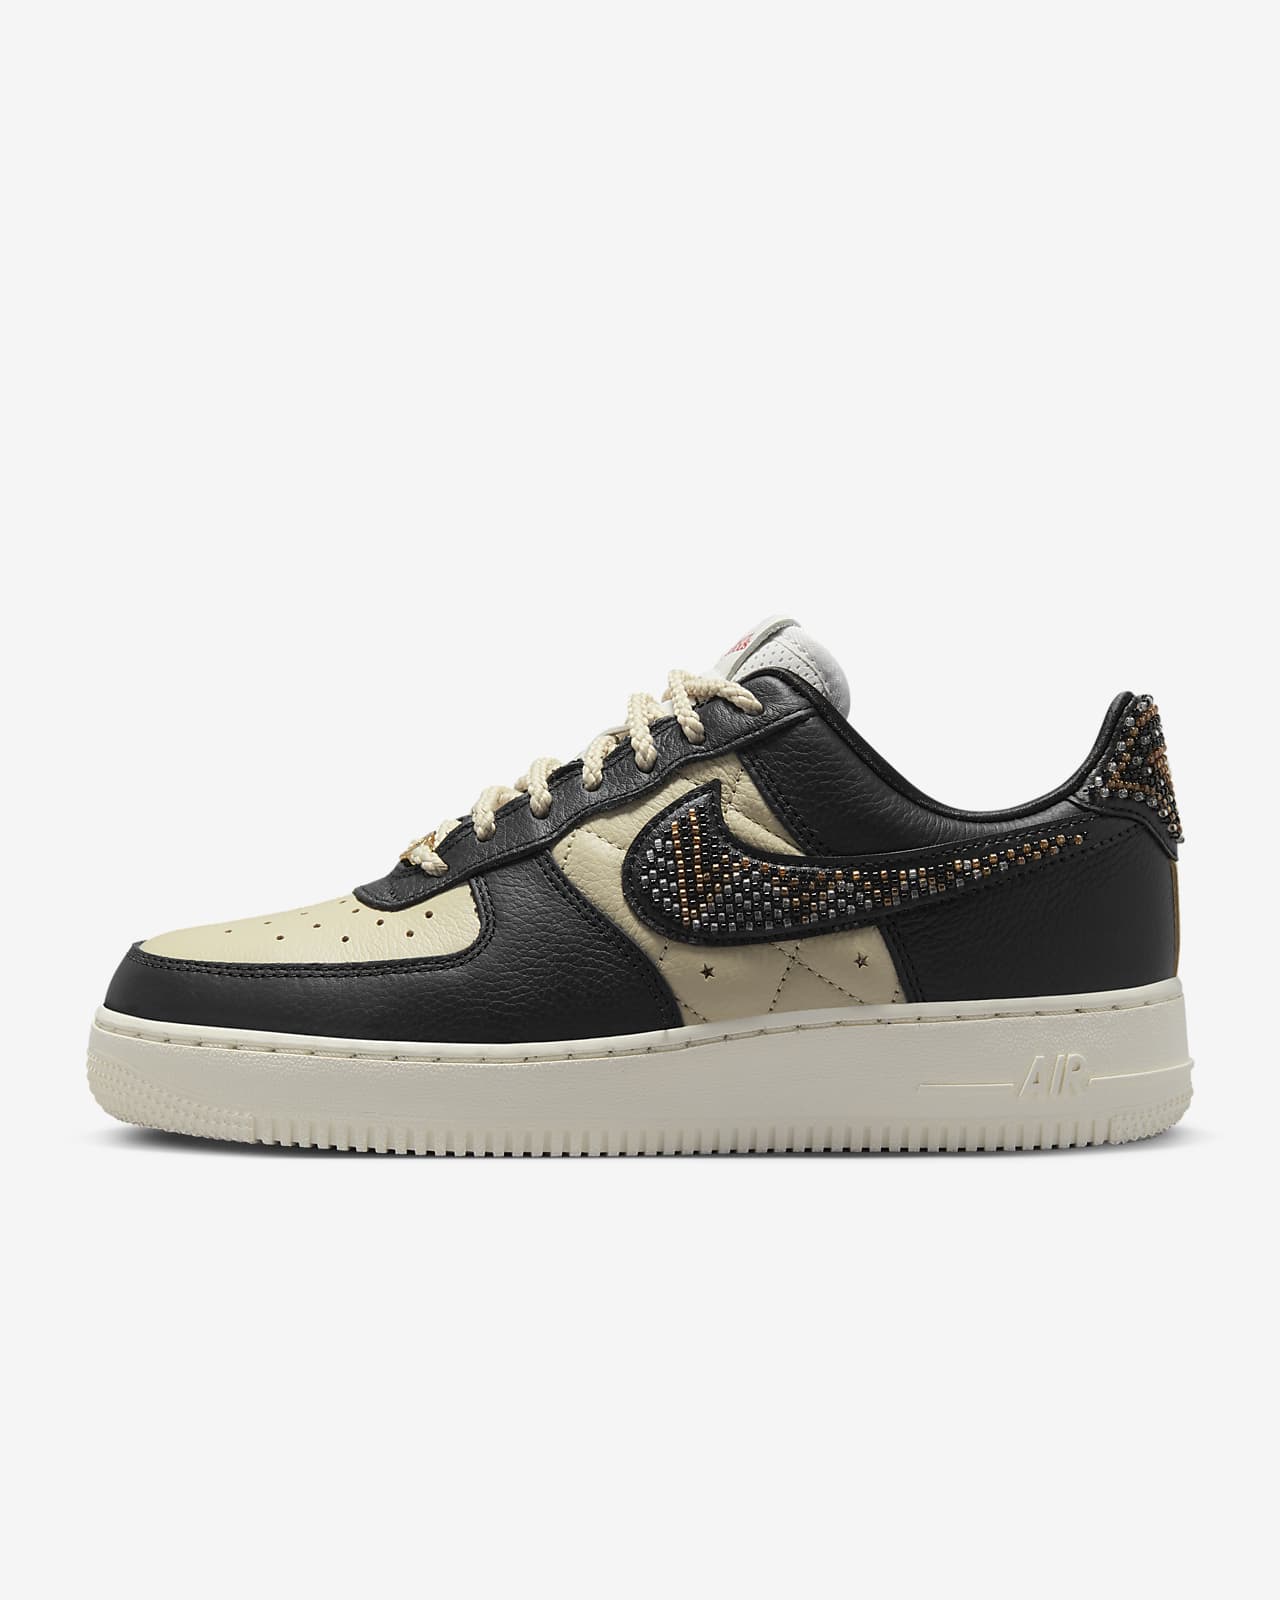 Nike Air Force 1 Low x Premium Goods Womens Shoes Review